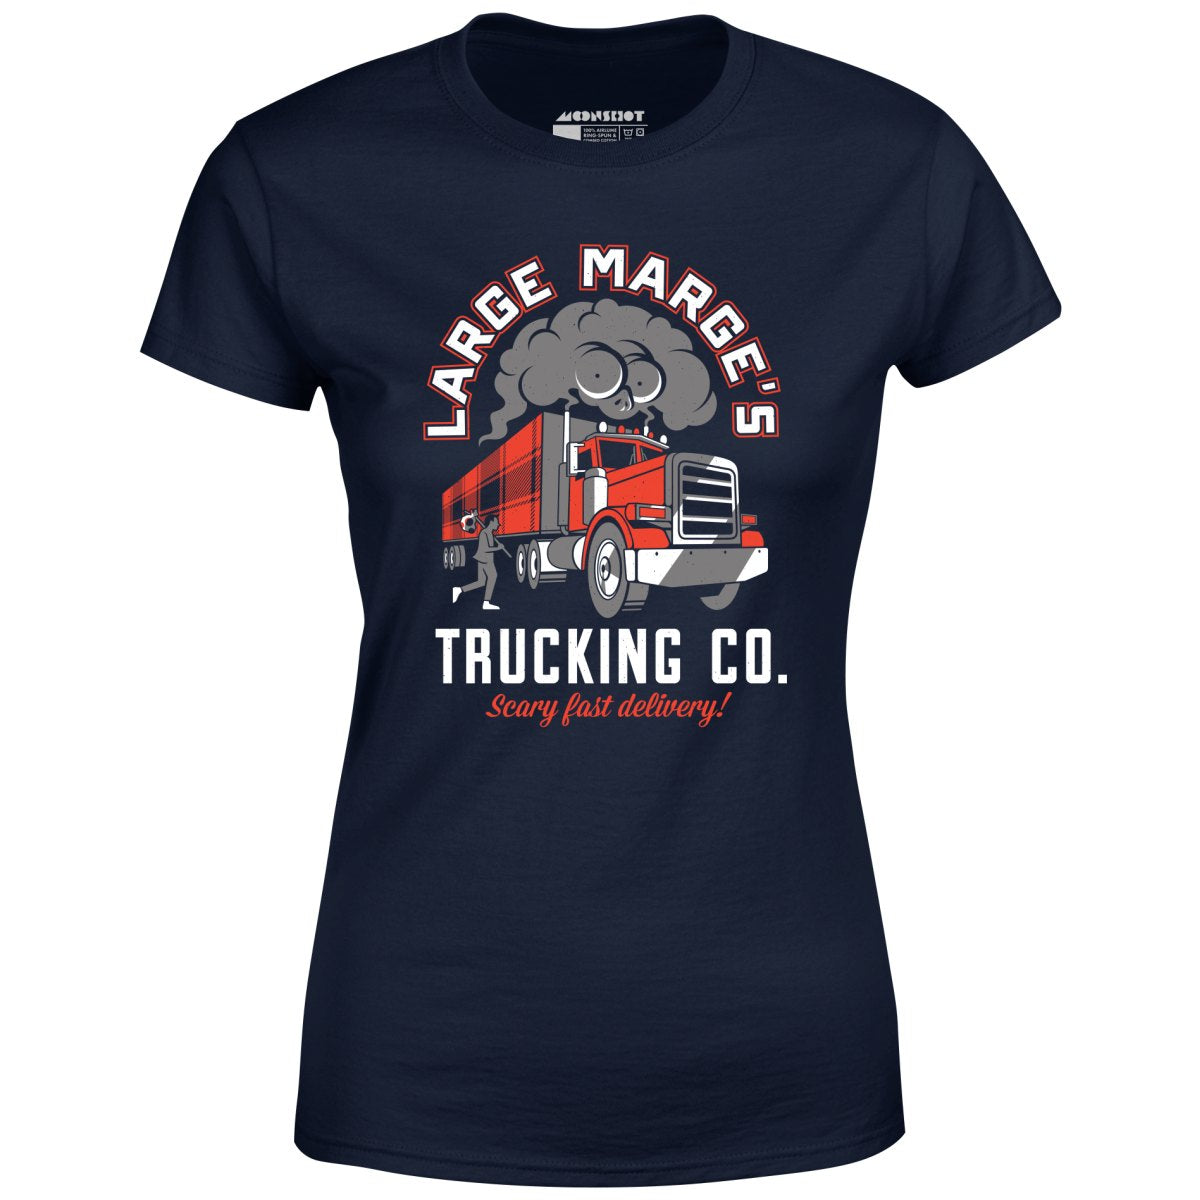 Large Marge's Trucking Co. - Women's T-Shirt